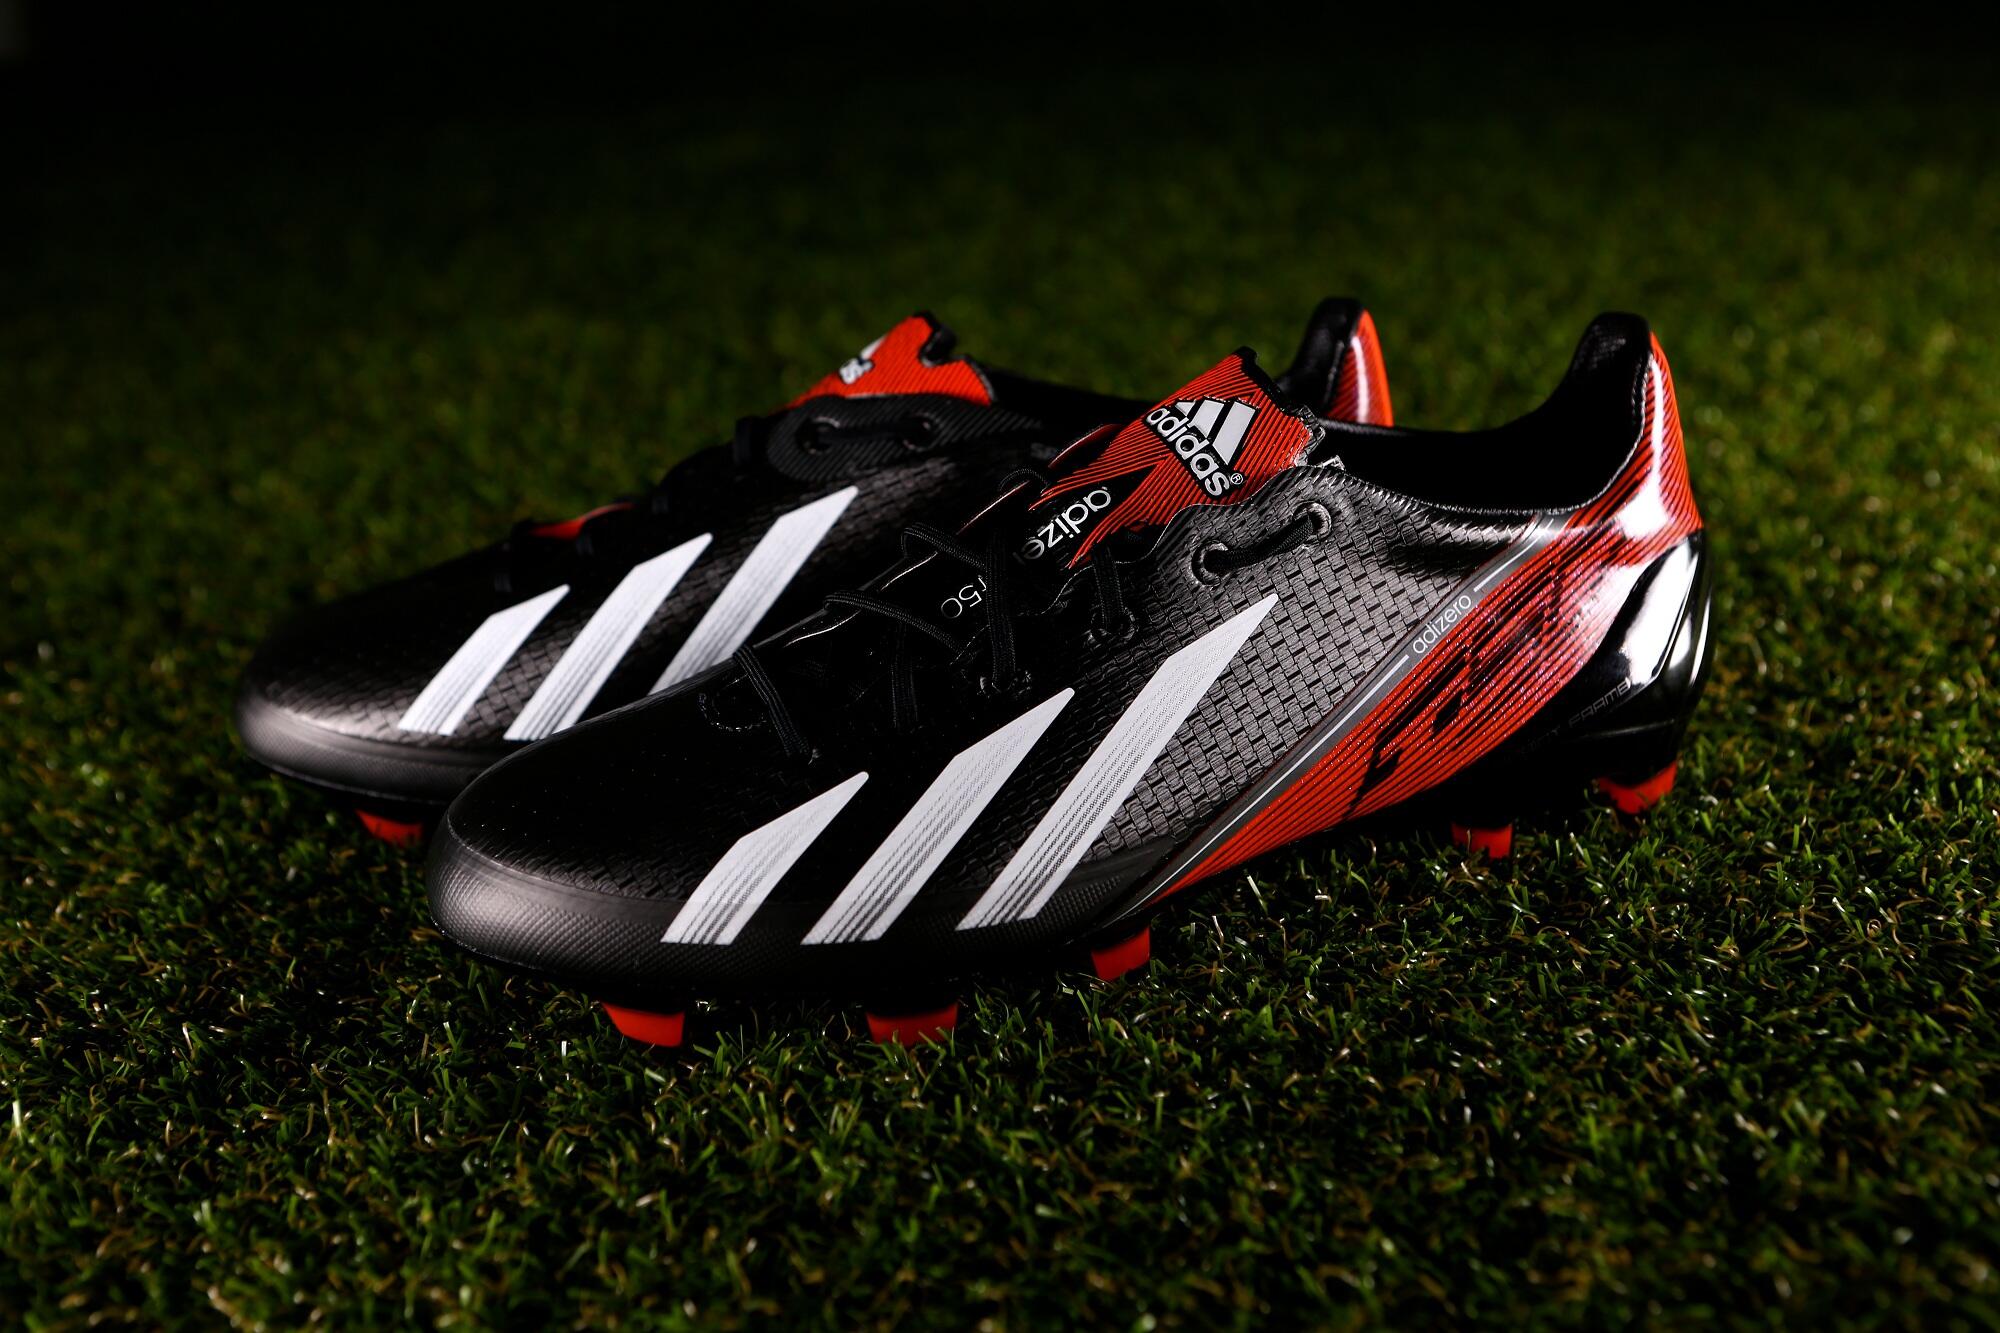 adidas Football on Twitter: "#FindFast in the new adizero f50 - http://t.co/uSHx9cqxUy http://t.co/223b4W6egH" / Twitter